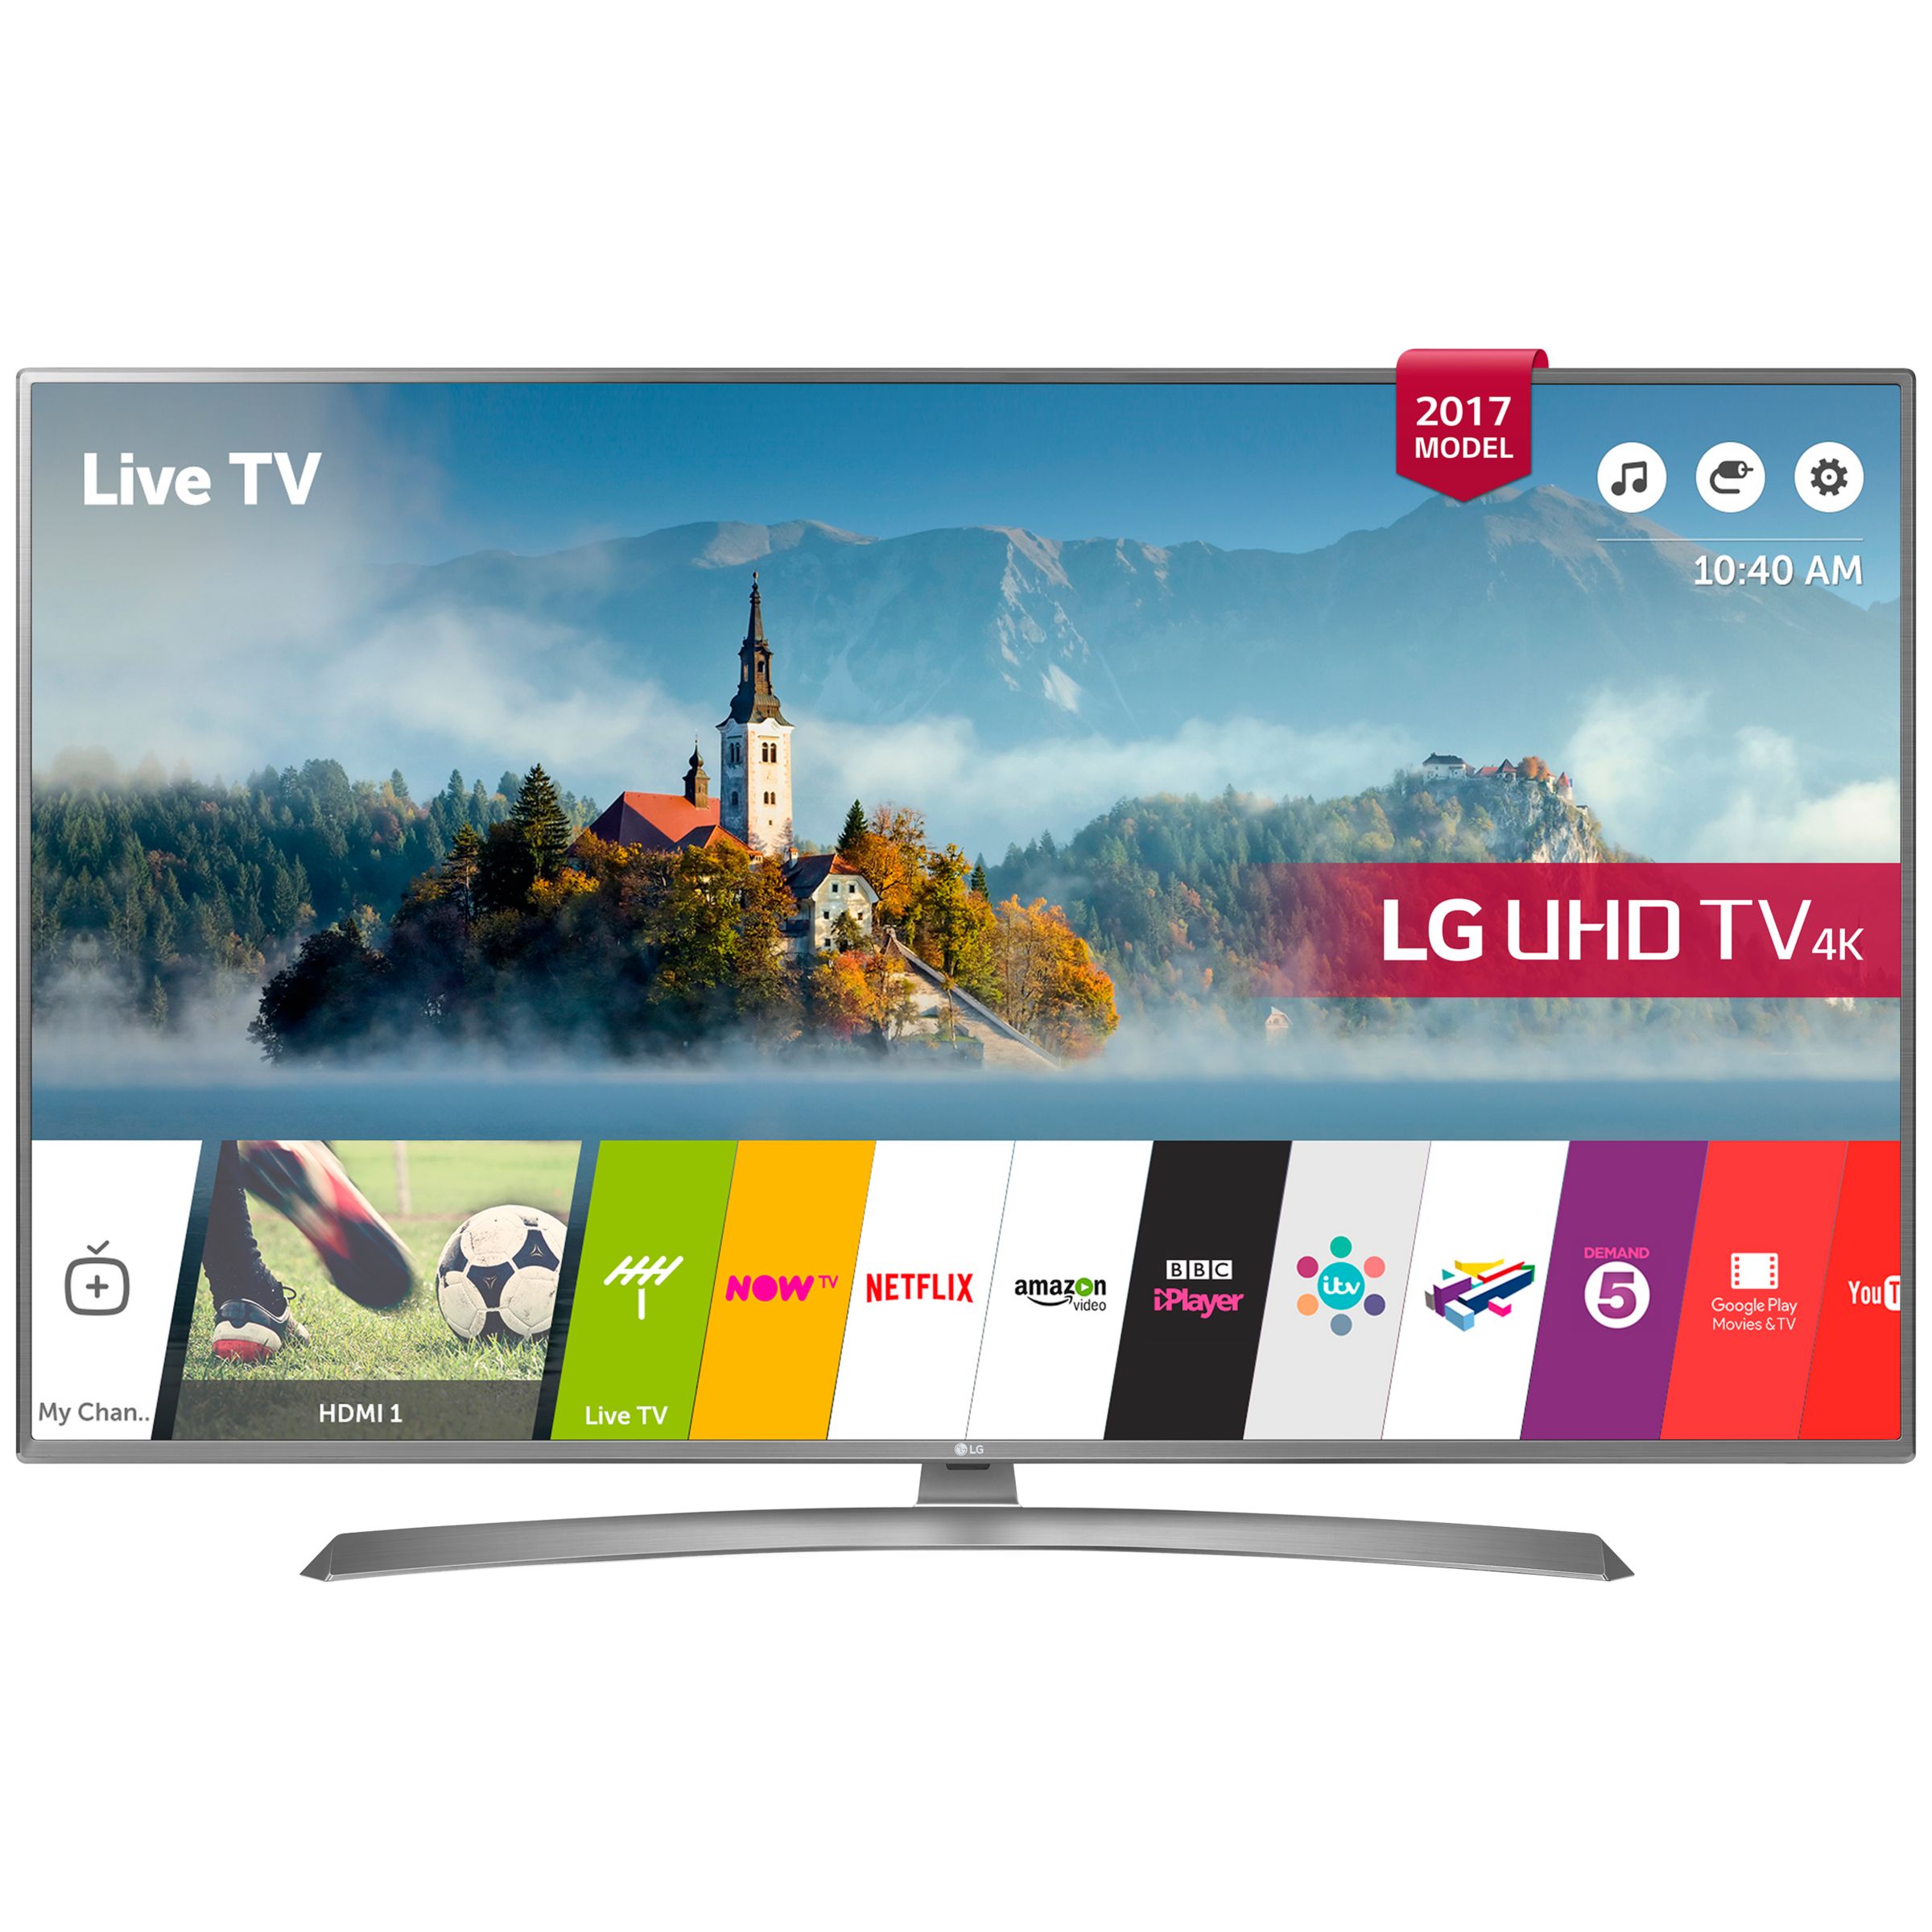 LG 43UJ670V LED HDR 4K Ultra HD Smart TV, 43" with Freeview Play & Crescent Stand, Grey